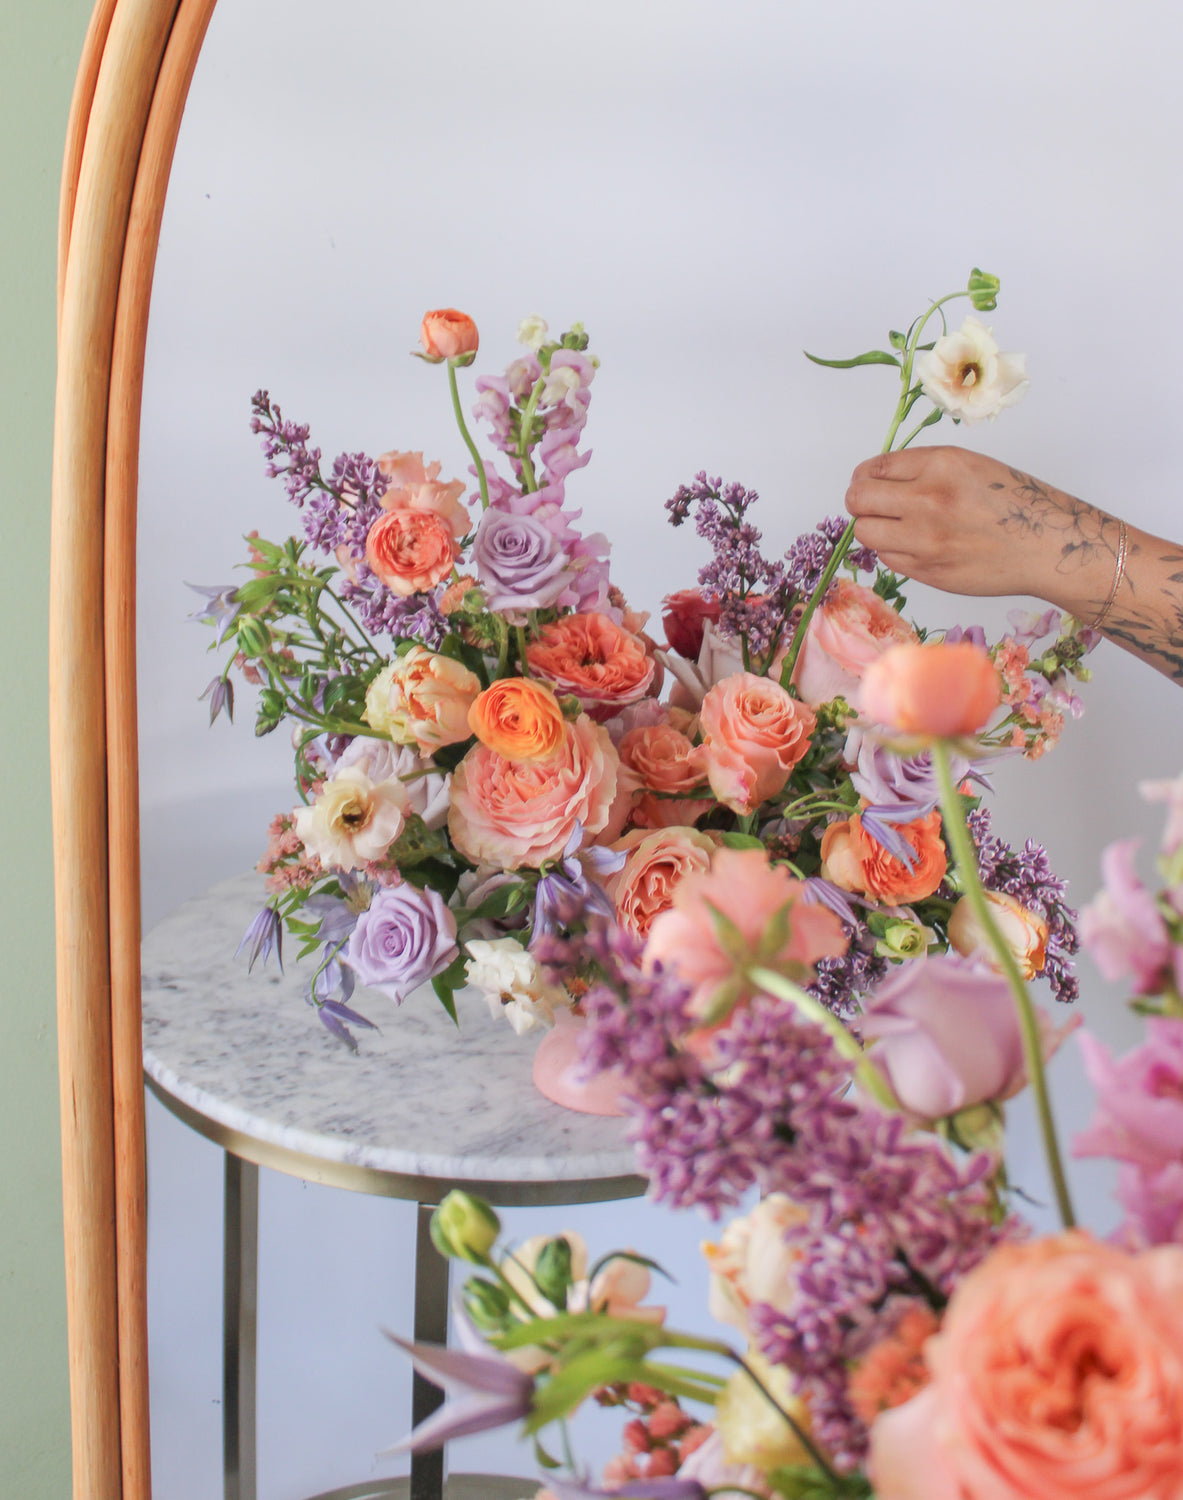 A reflection in a mirror of A flower arrangement in a pink vase on a marble table with peach, orange, purple, and lavender flowers, including rose, clematis, hyacinth, delphinium, anemone, tulip, and status. 